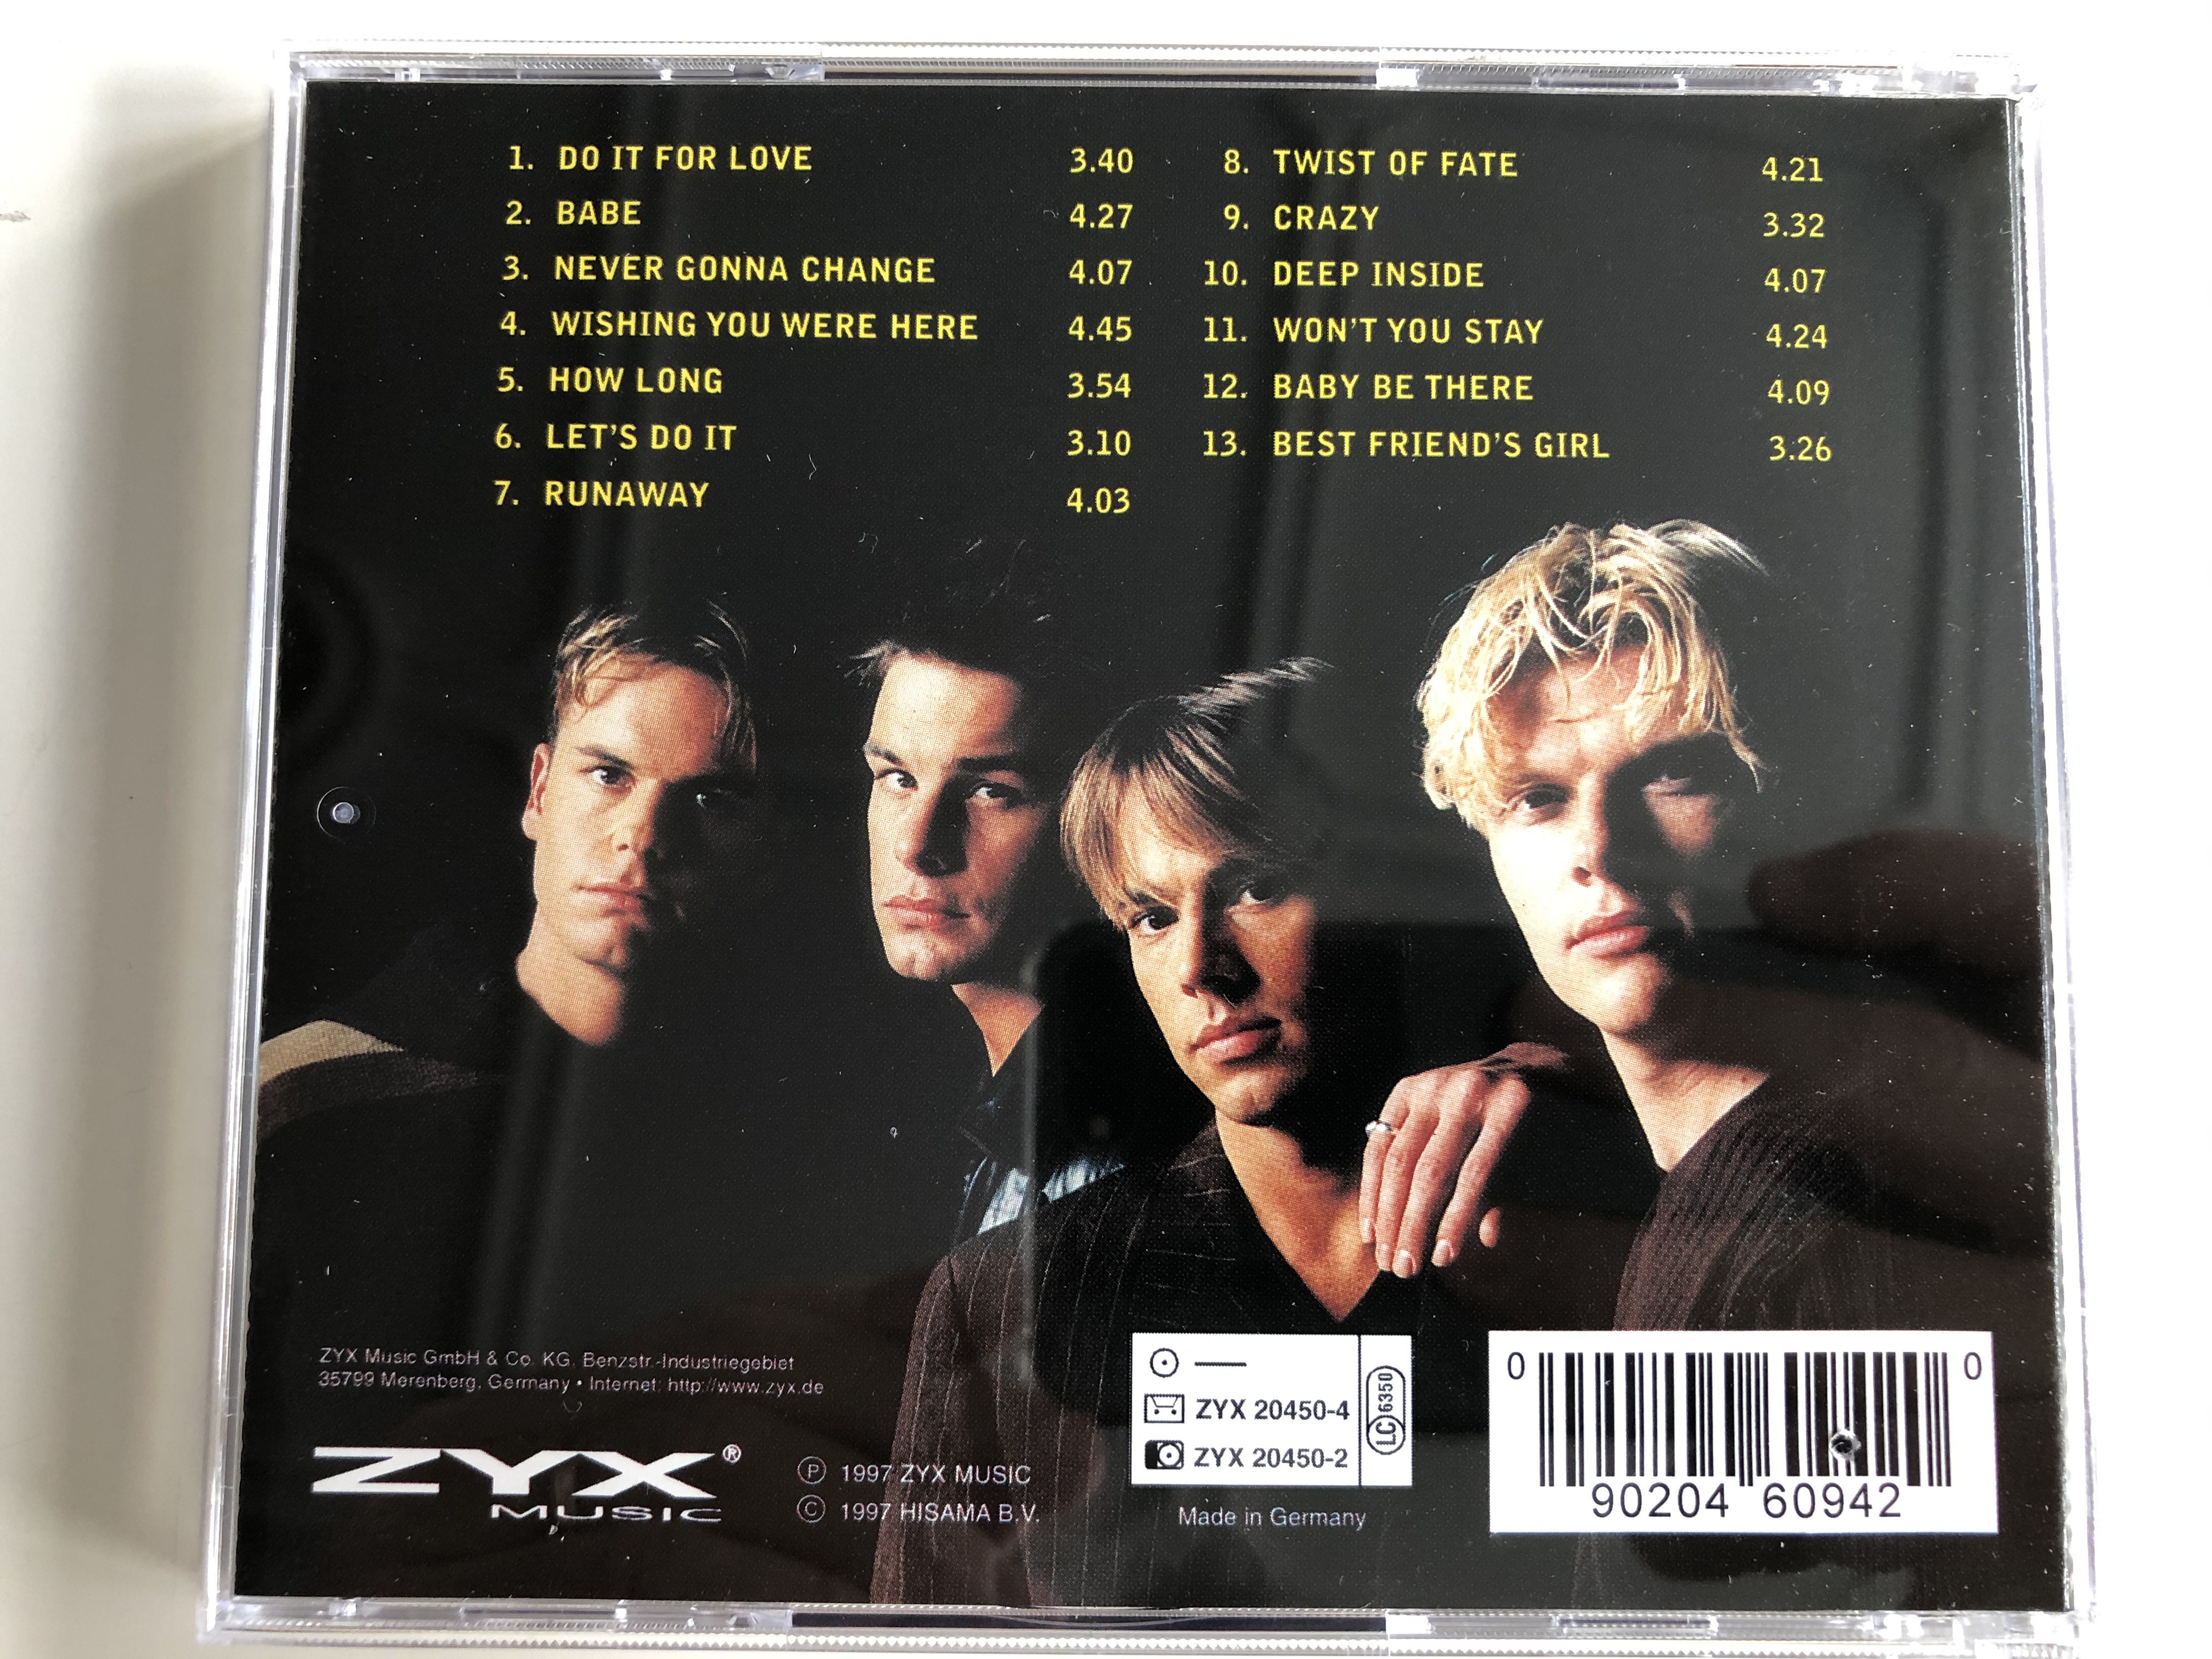 caught-in-the-act-vibe-zyx-music-audio-cd-1997-zyx-20450-2-7-.jpg